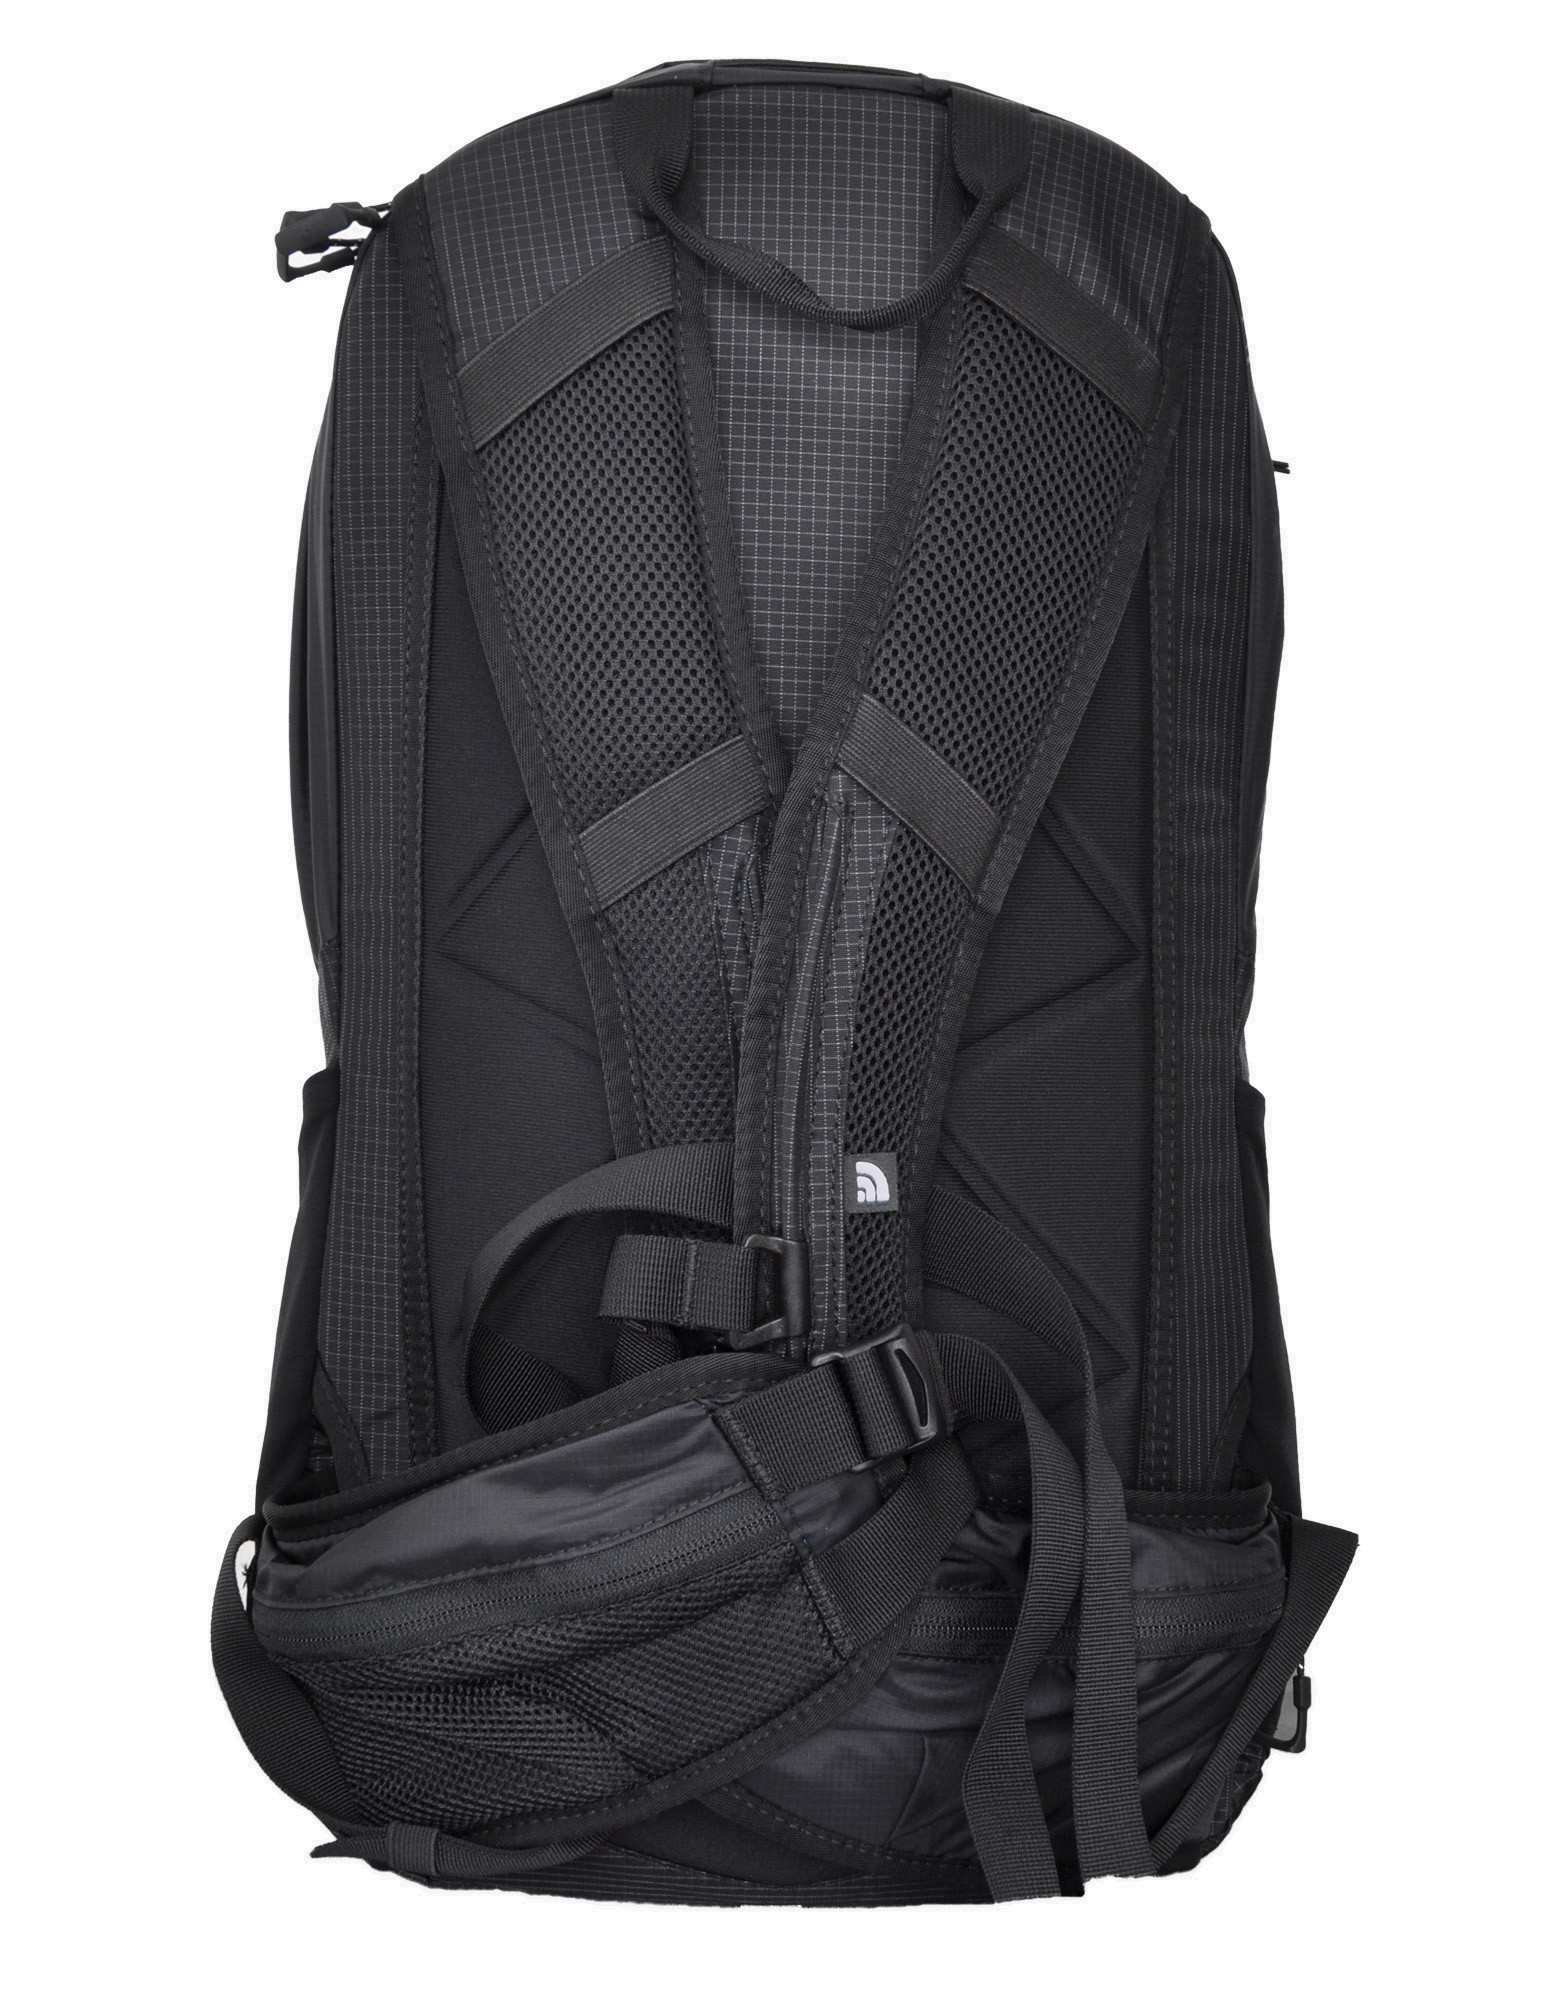 gallon op vakantie Noodlottig Angstrom 20L Backpack by The north face, Colour: Black - iafstore.com